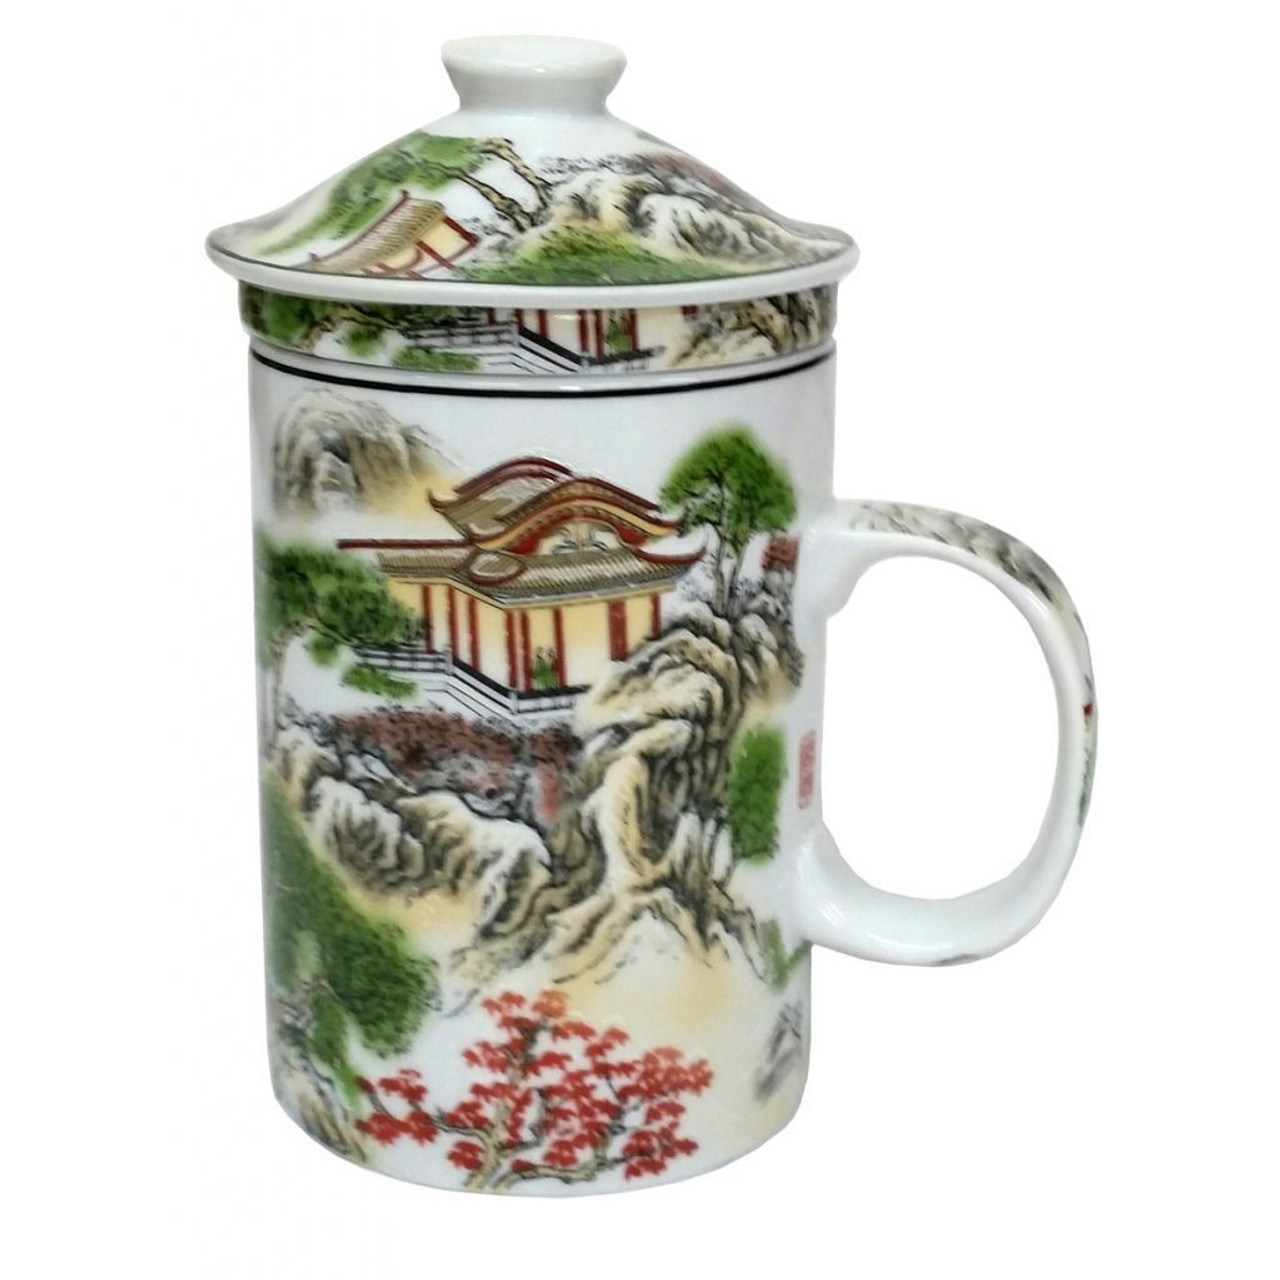 Porcelain Chinese Tea Mug with Infuser and Lid - Palaces Pattern